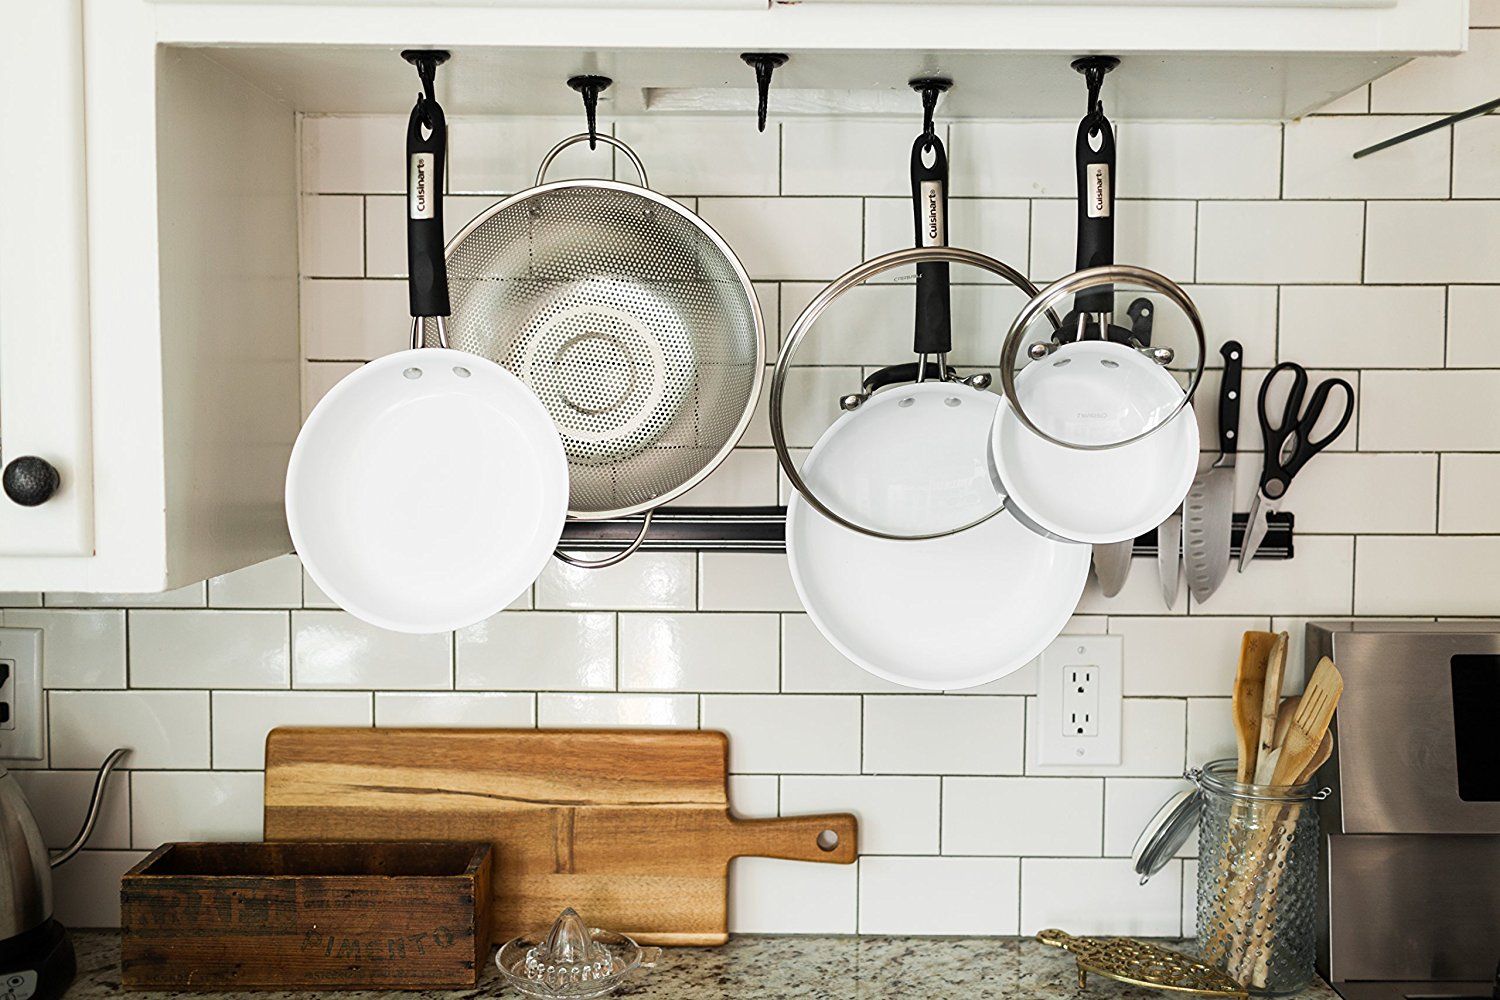 10 Things All Of The Most Organized Kitchens Have In Common